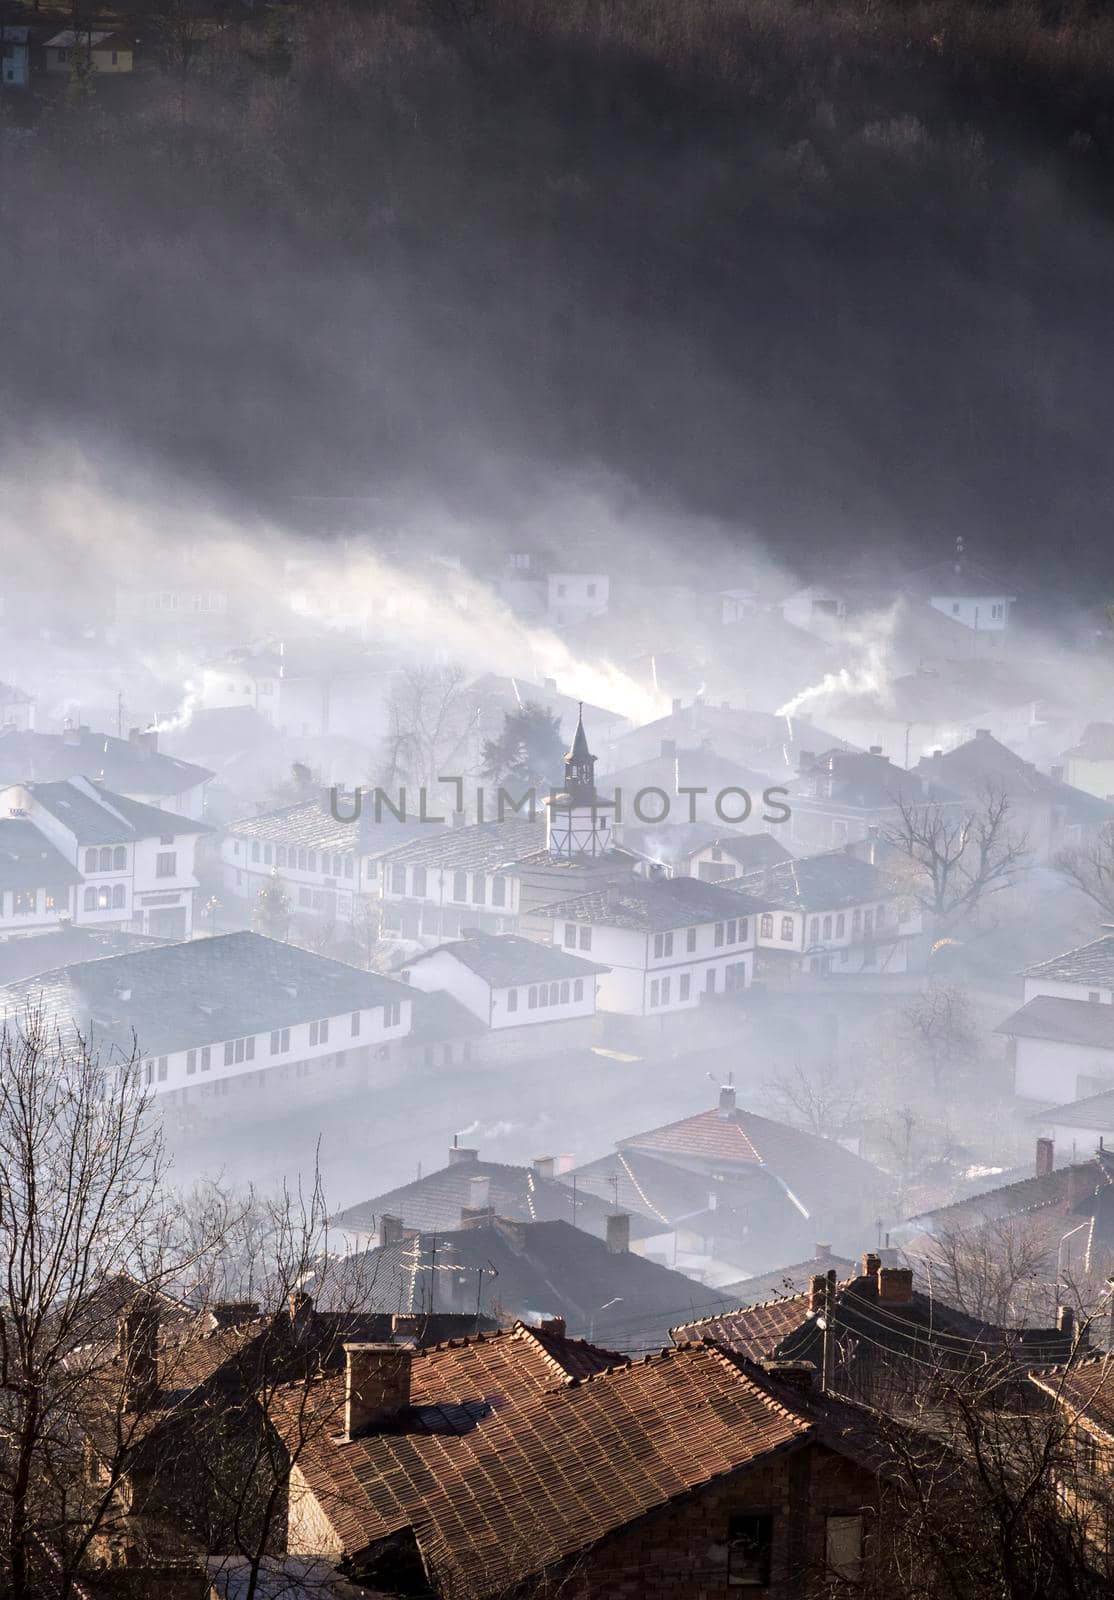 Mountain town in clouds of fog and smoking chimneys early morning